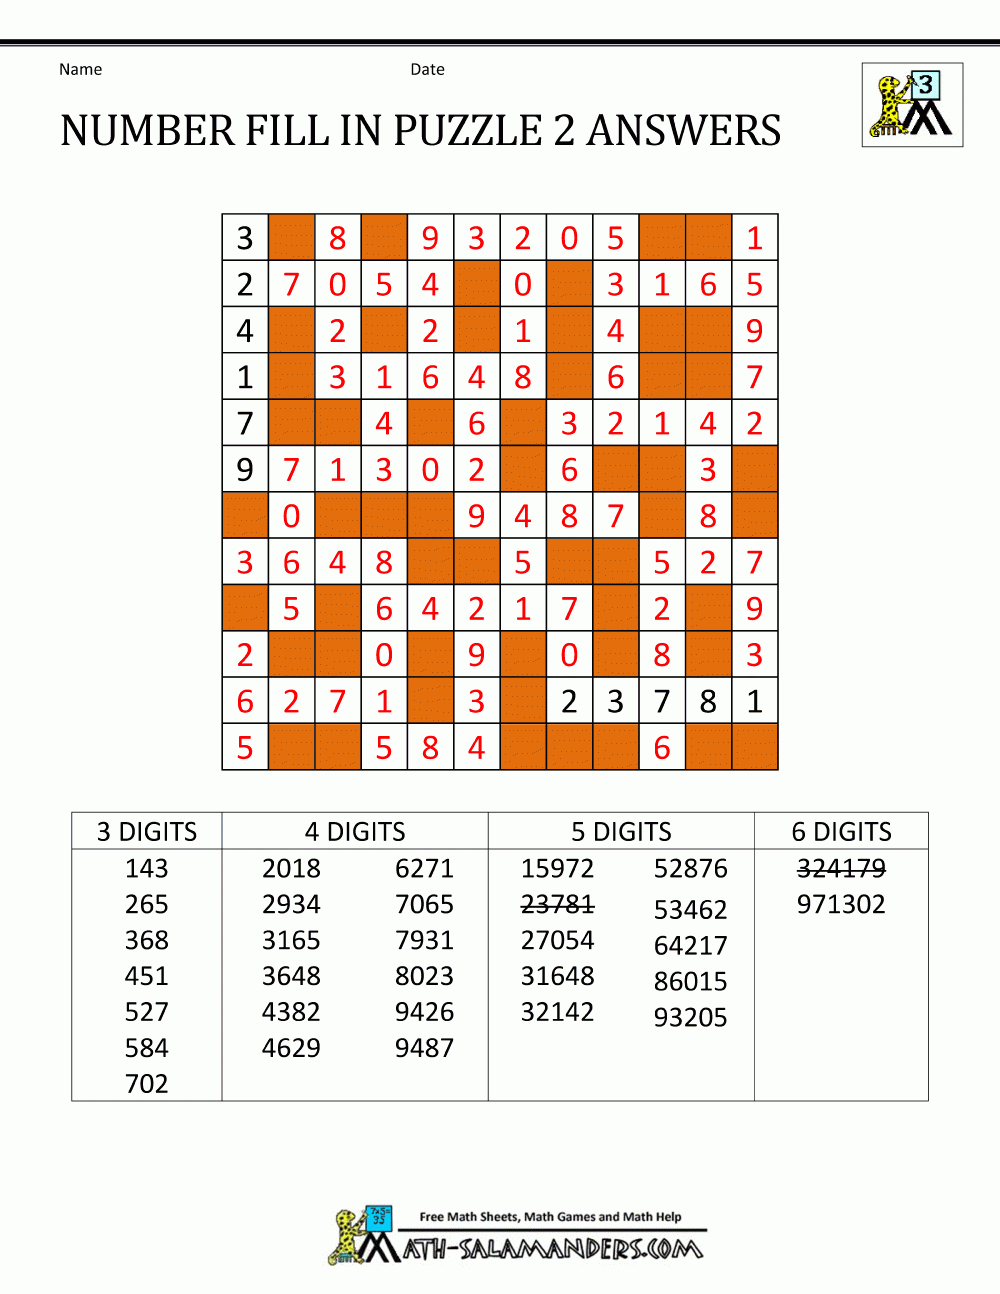 Number Fill In Puzzles - Printable-Puzzles.com Answers